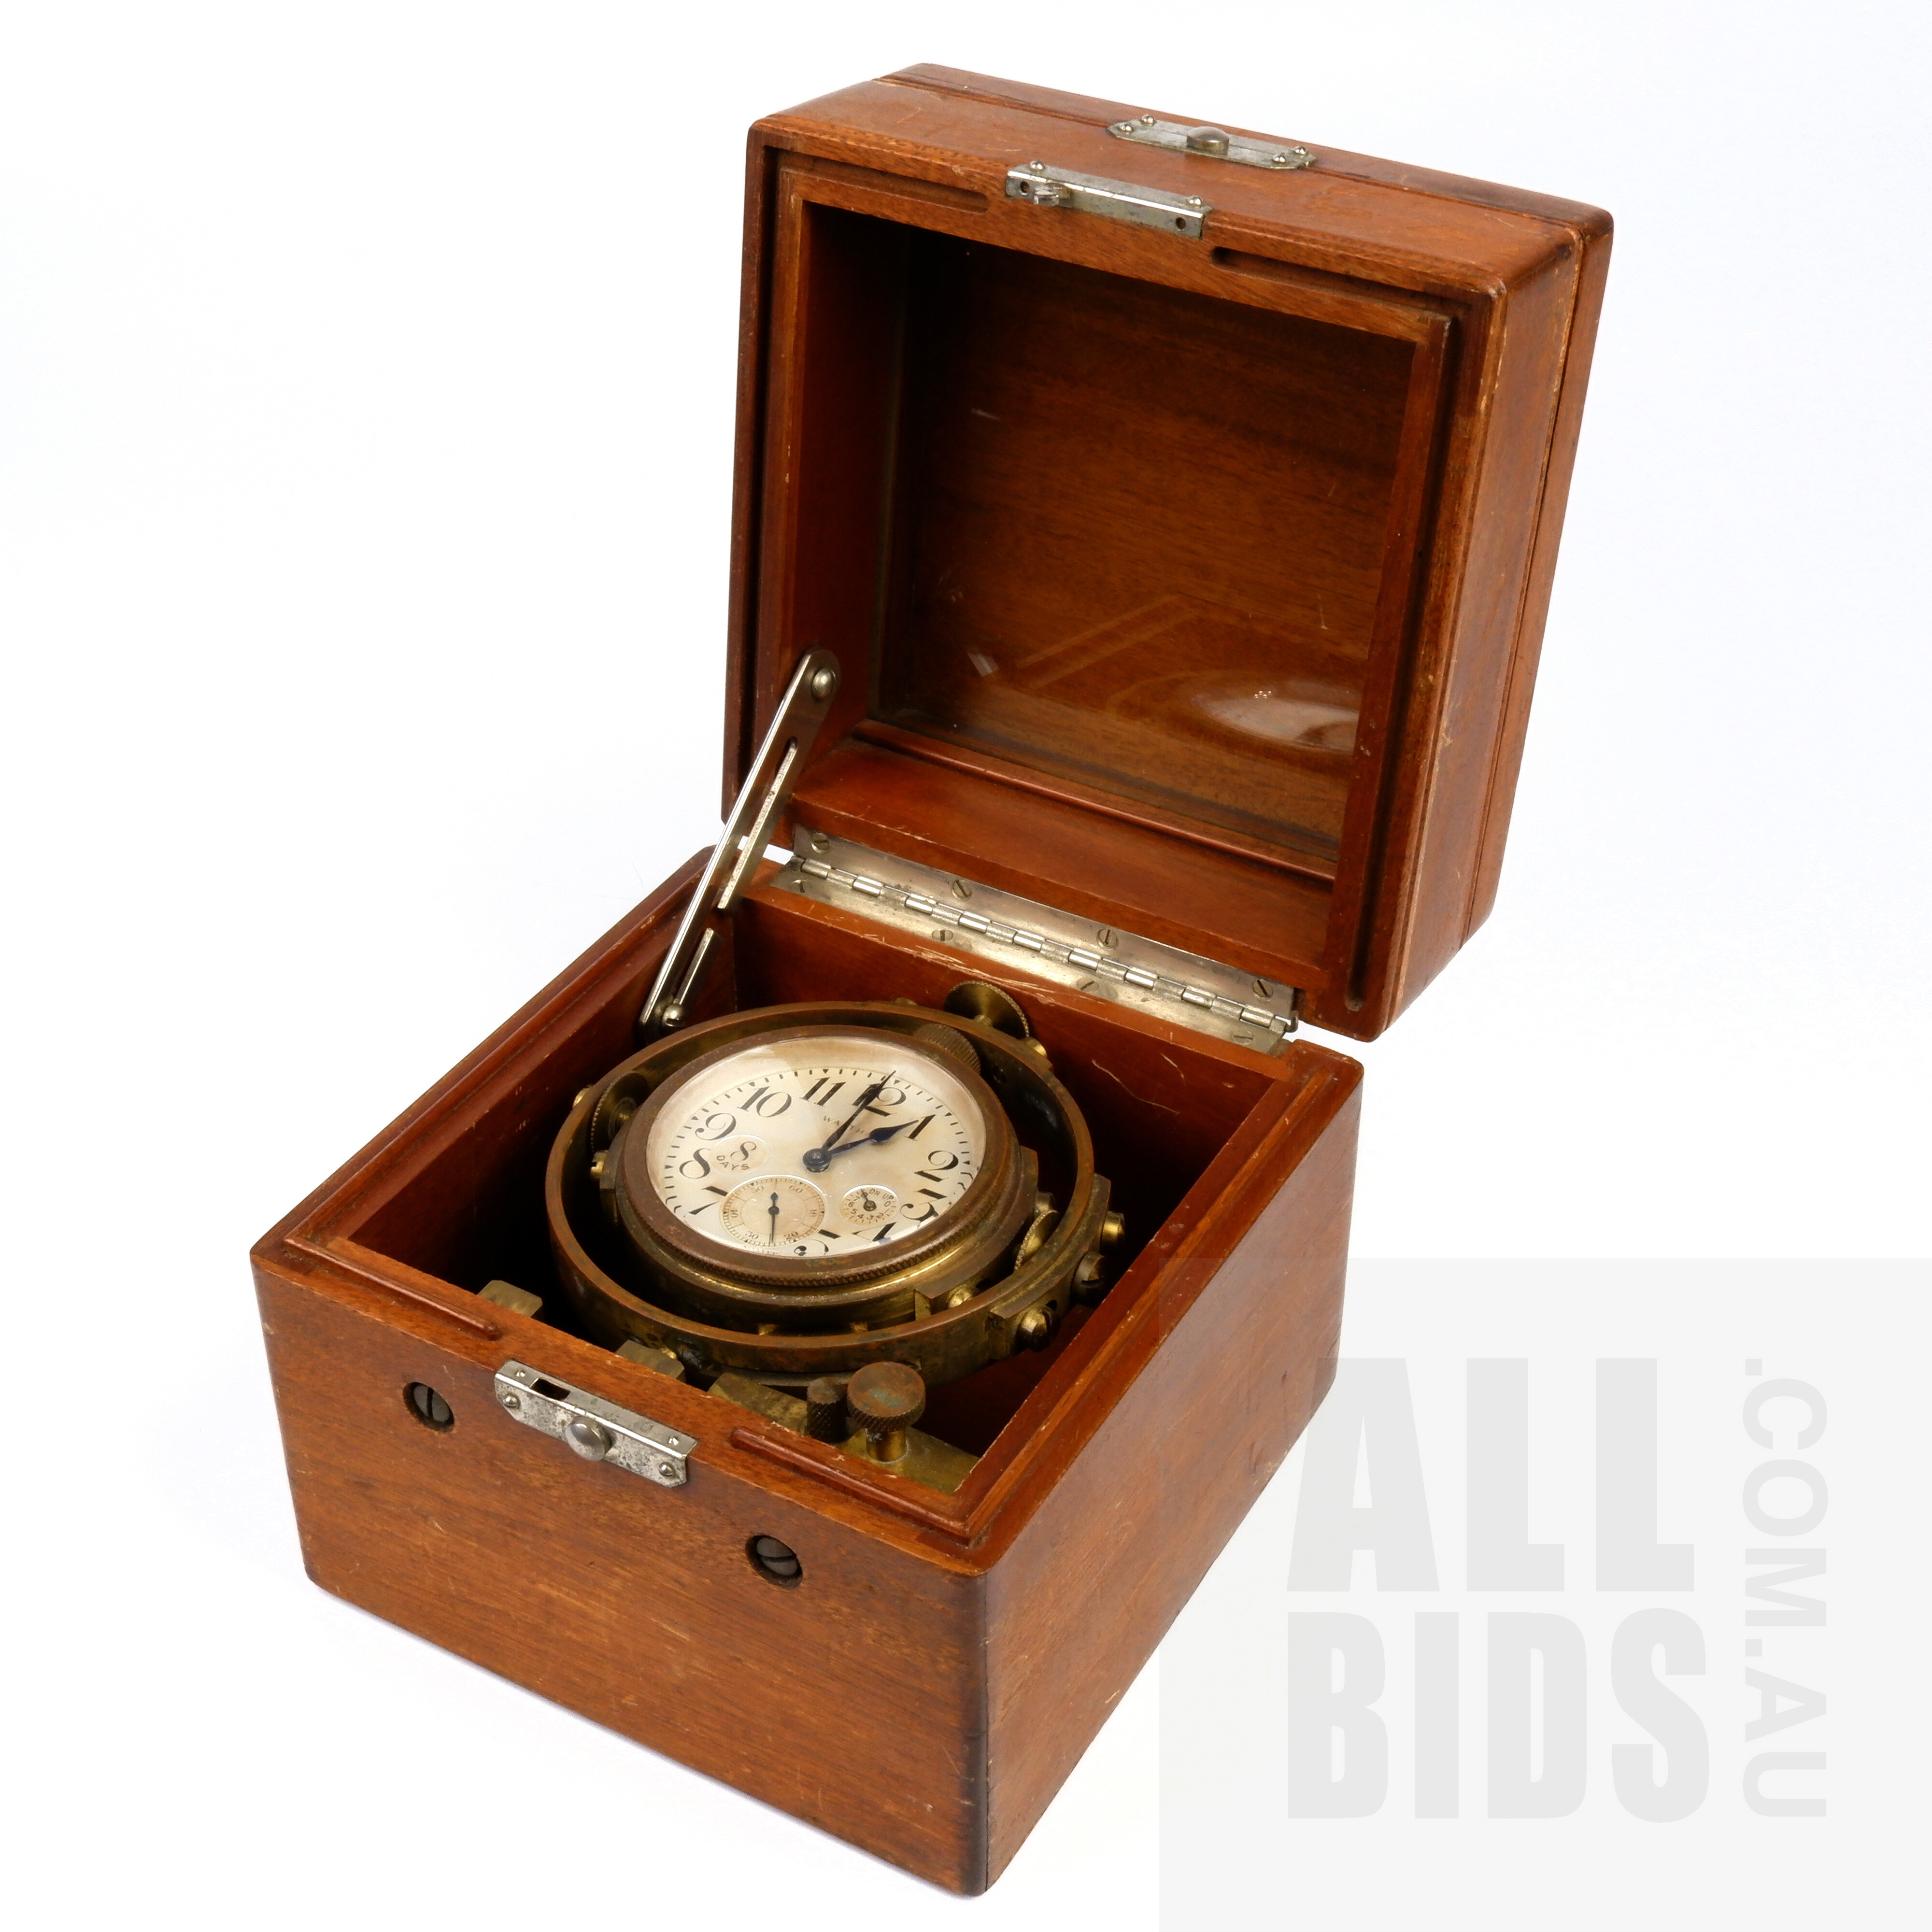 'Maritime Gimbal Chronometer with American Waltham Eight Day 15 Jewel Watch, Model No 30475477'